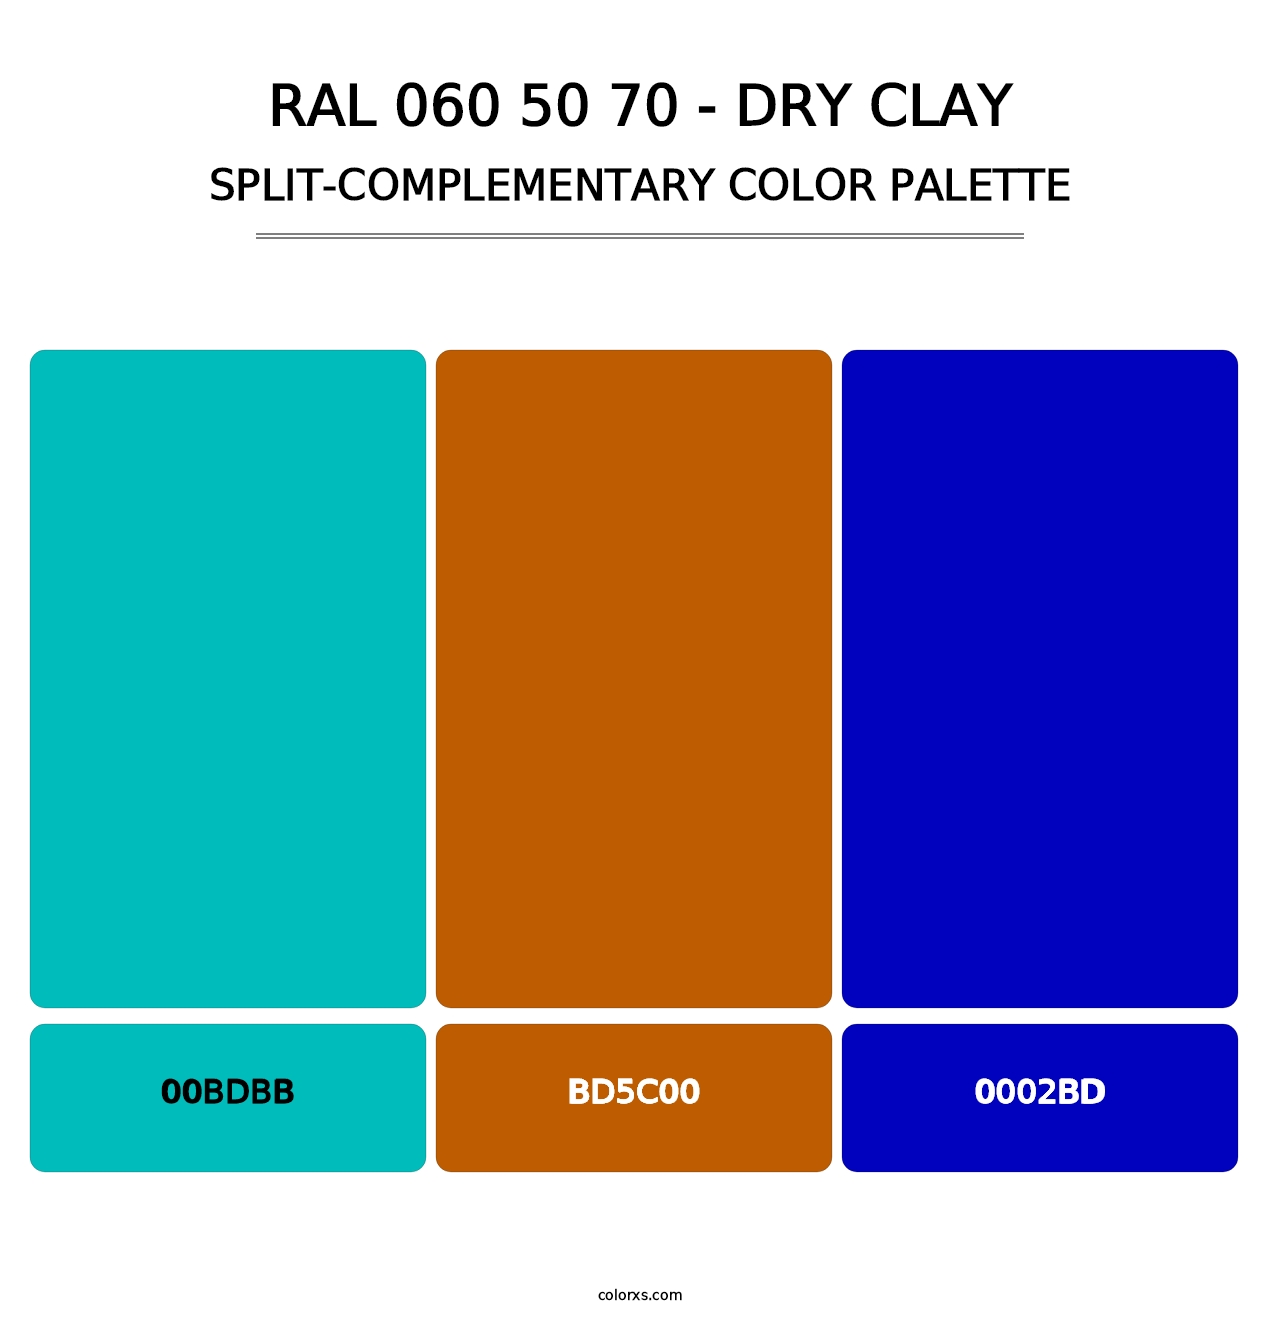 RAL 060 50 70 - Dry Clay - Split-Complementary Color Palette